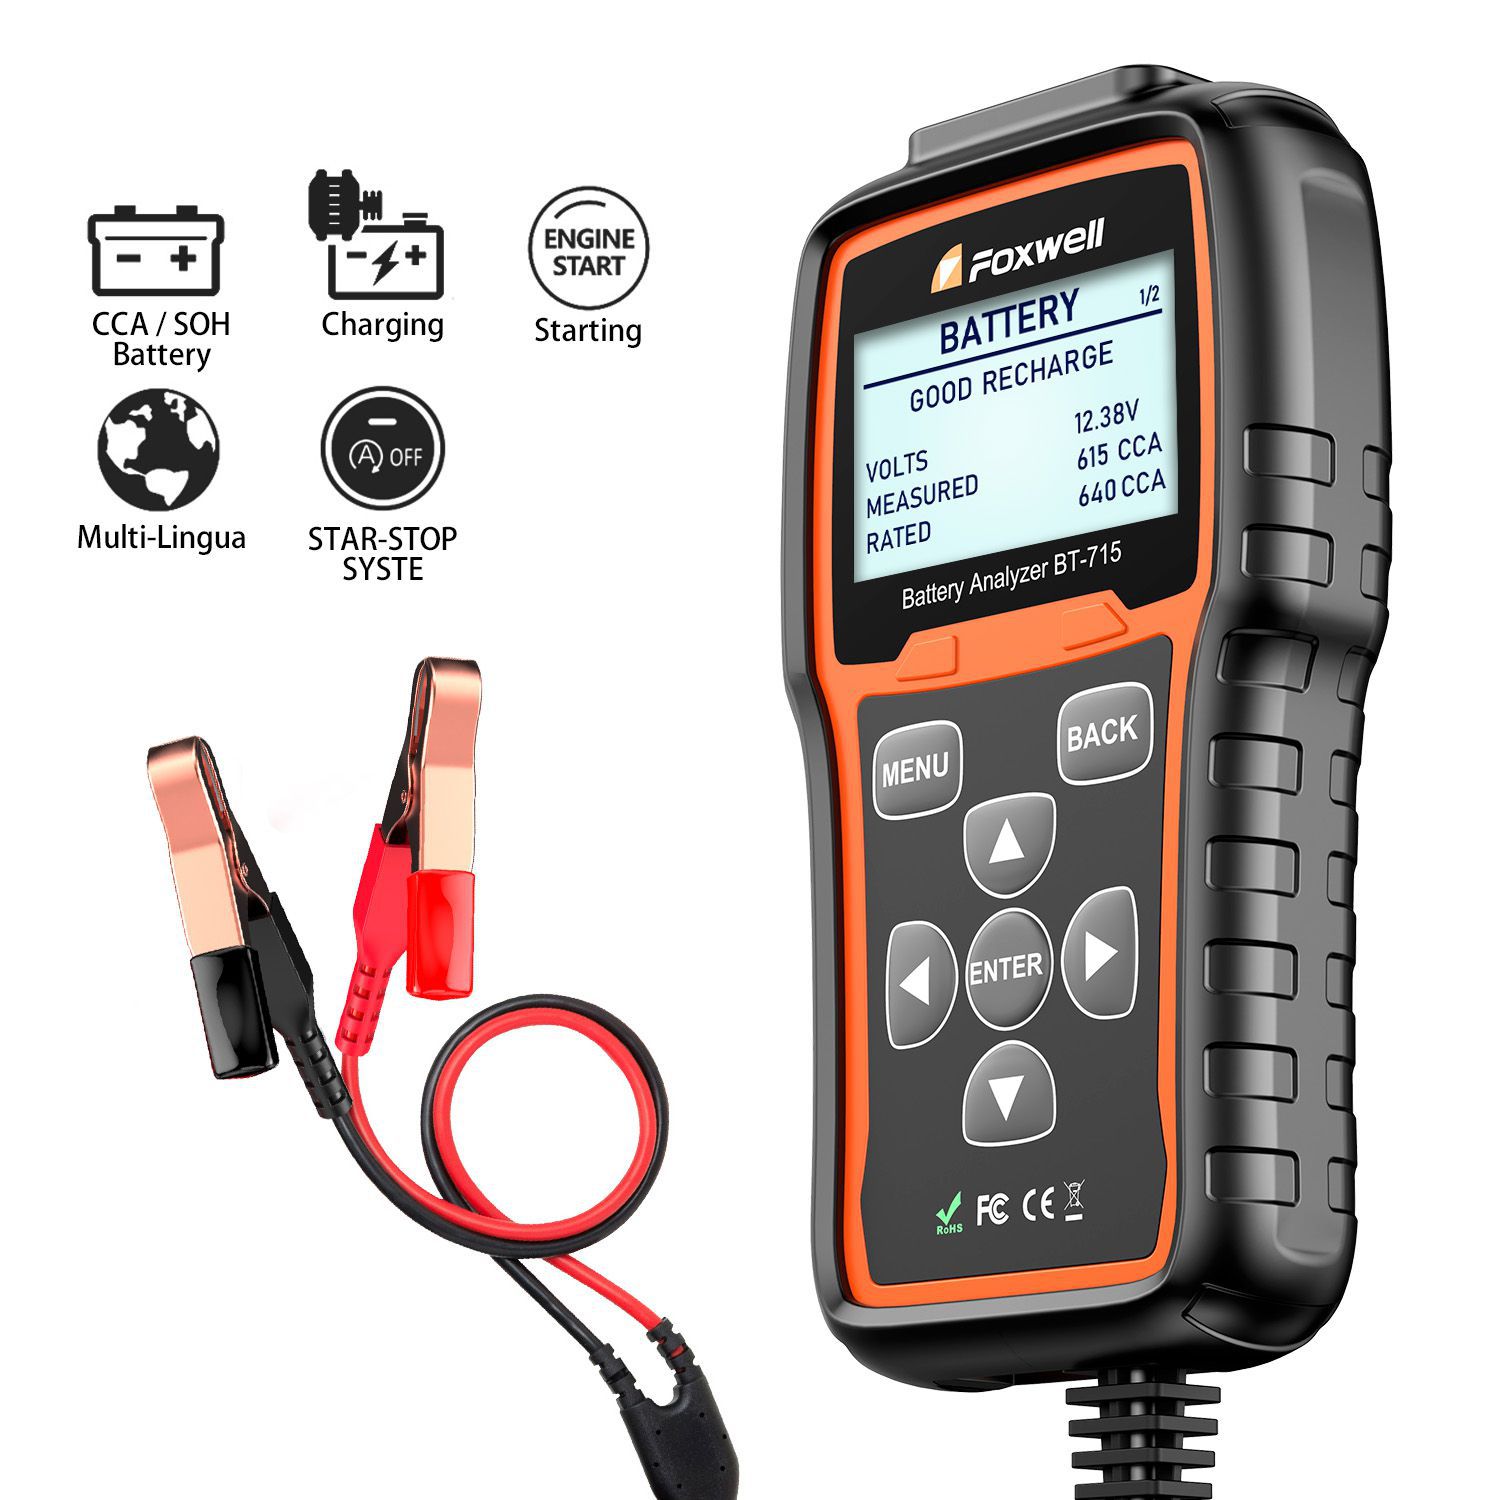 Fxwell BT - 715 Battery analyser supporte multilingue remplacement fxwell BT - 705